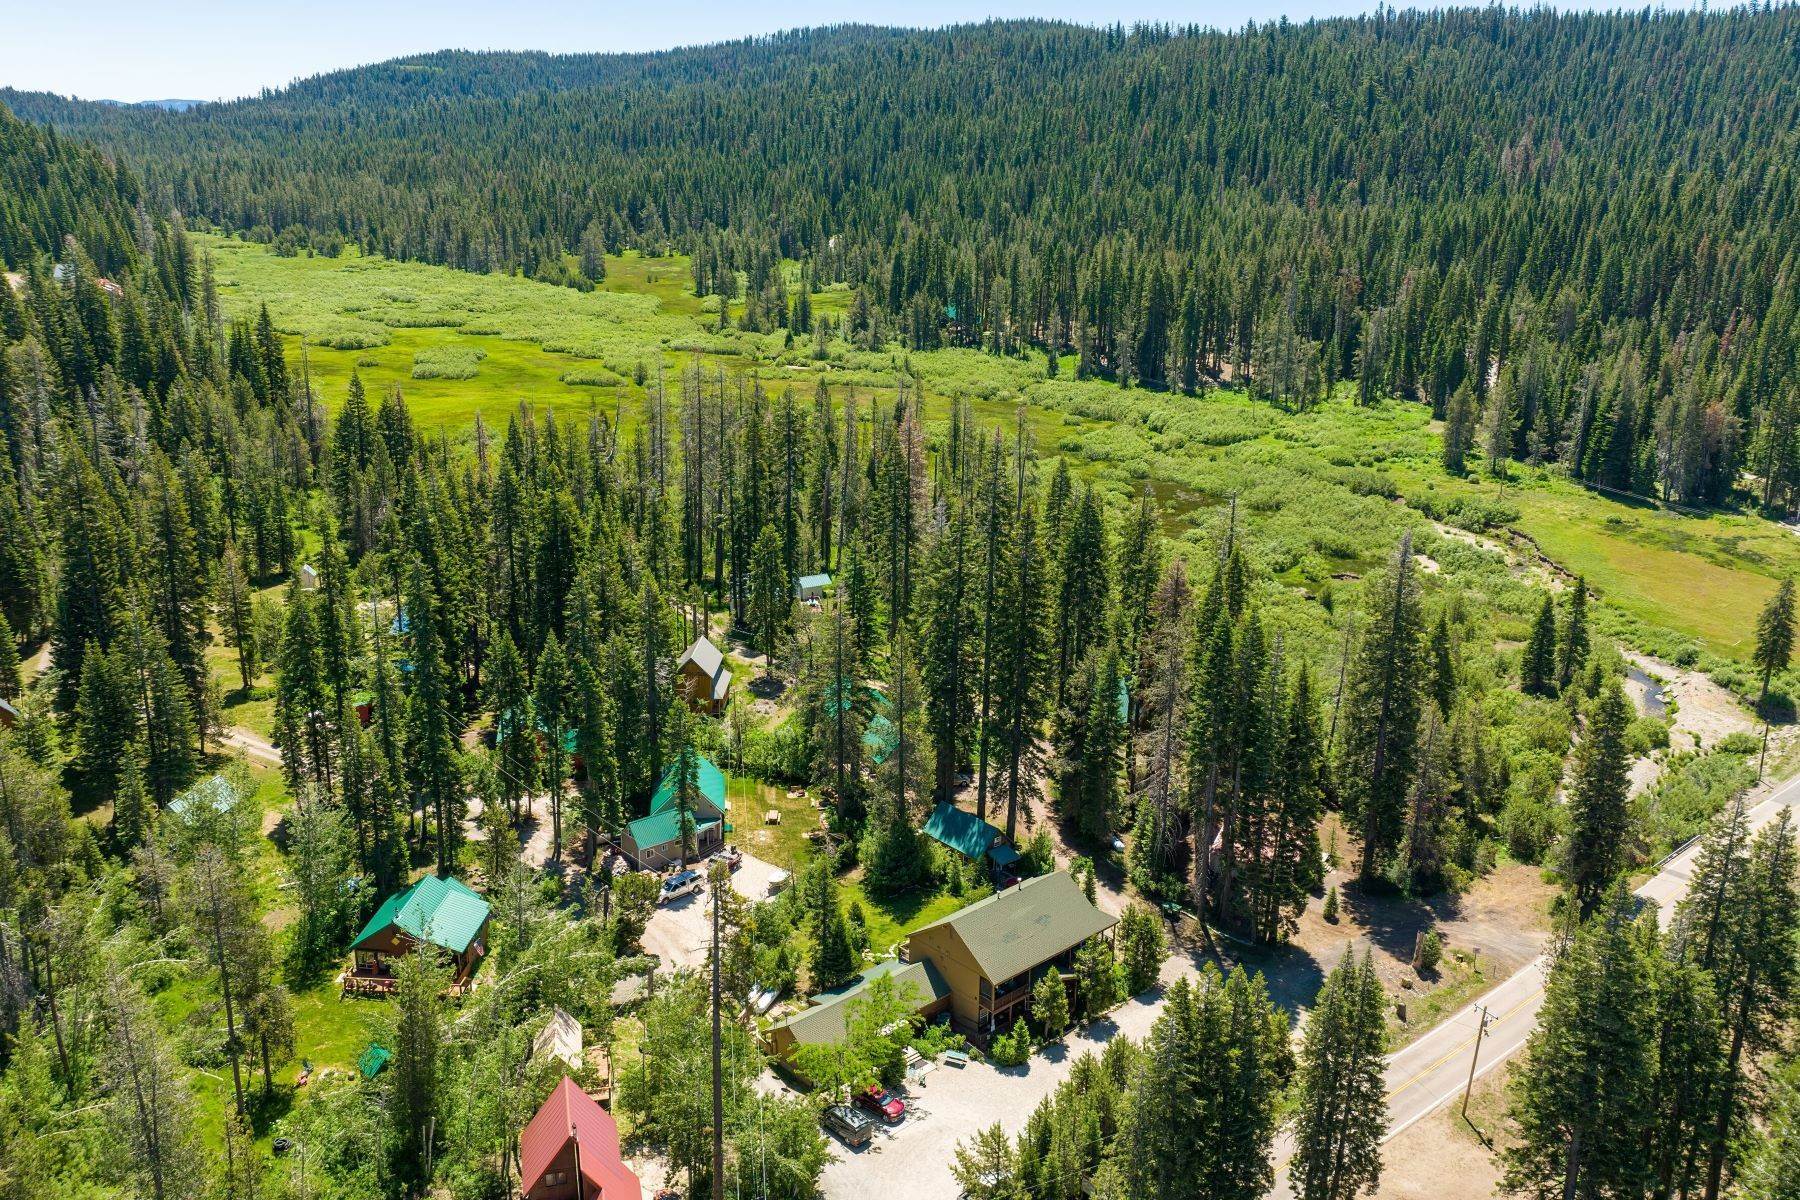 48. Property for Active at Bucks Lake Inn and Store With Cabins 16788 Bucks Lake Rd Quincy, California 95971 United States